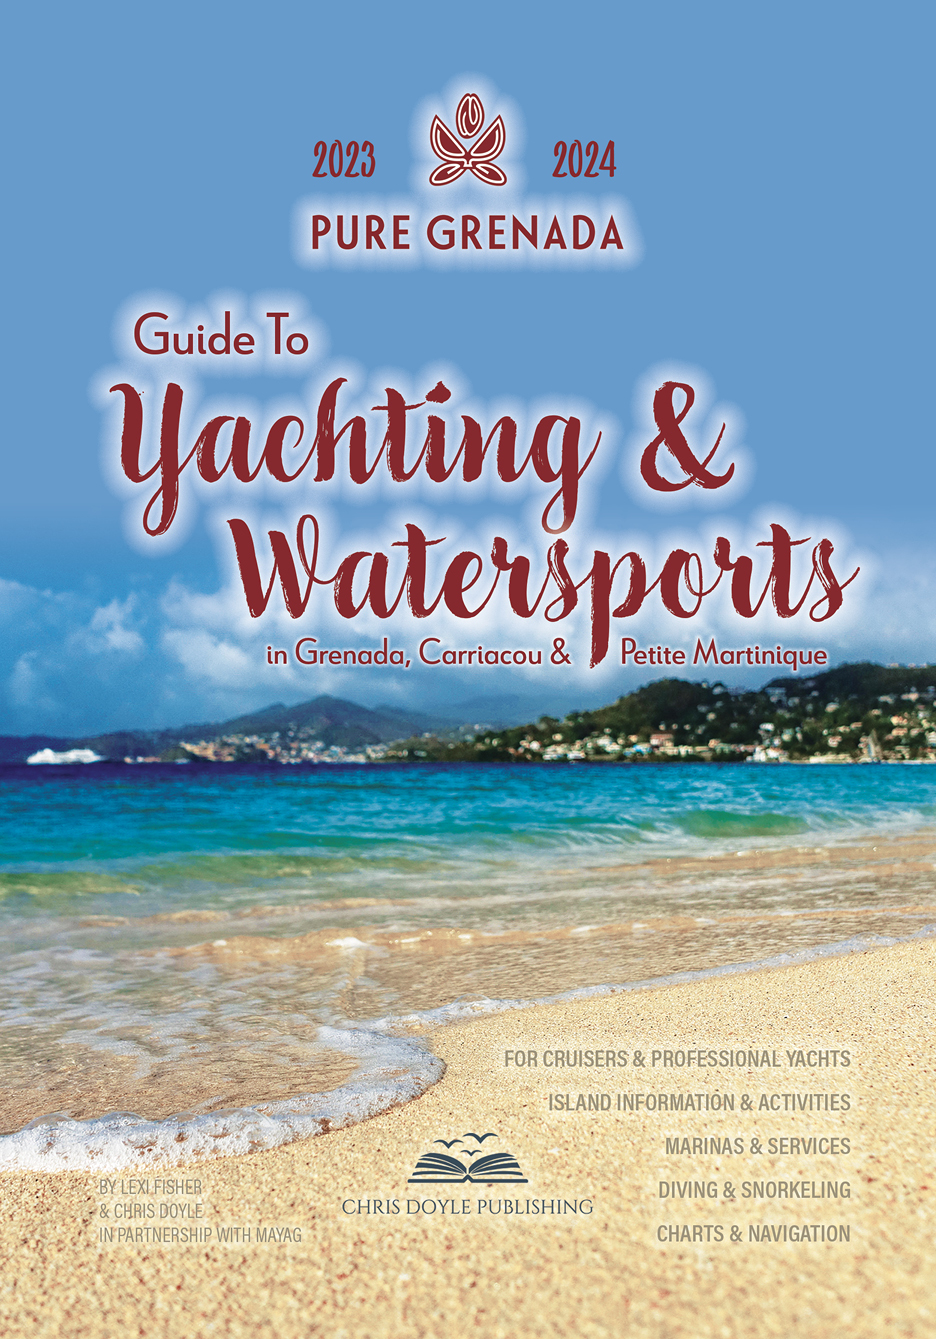 Pure Grenada Guide to Yachting and Watersports 2023 2024